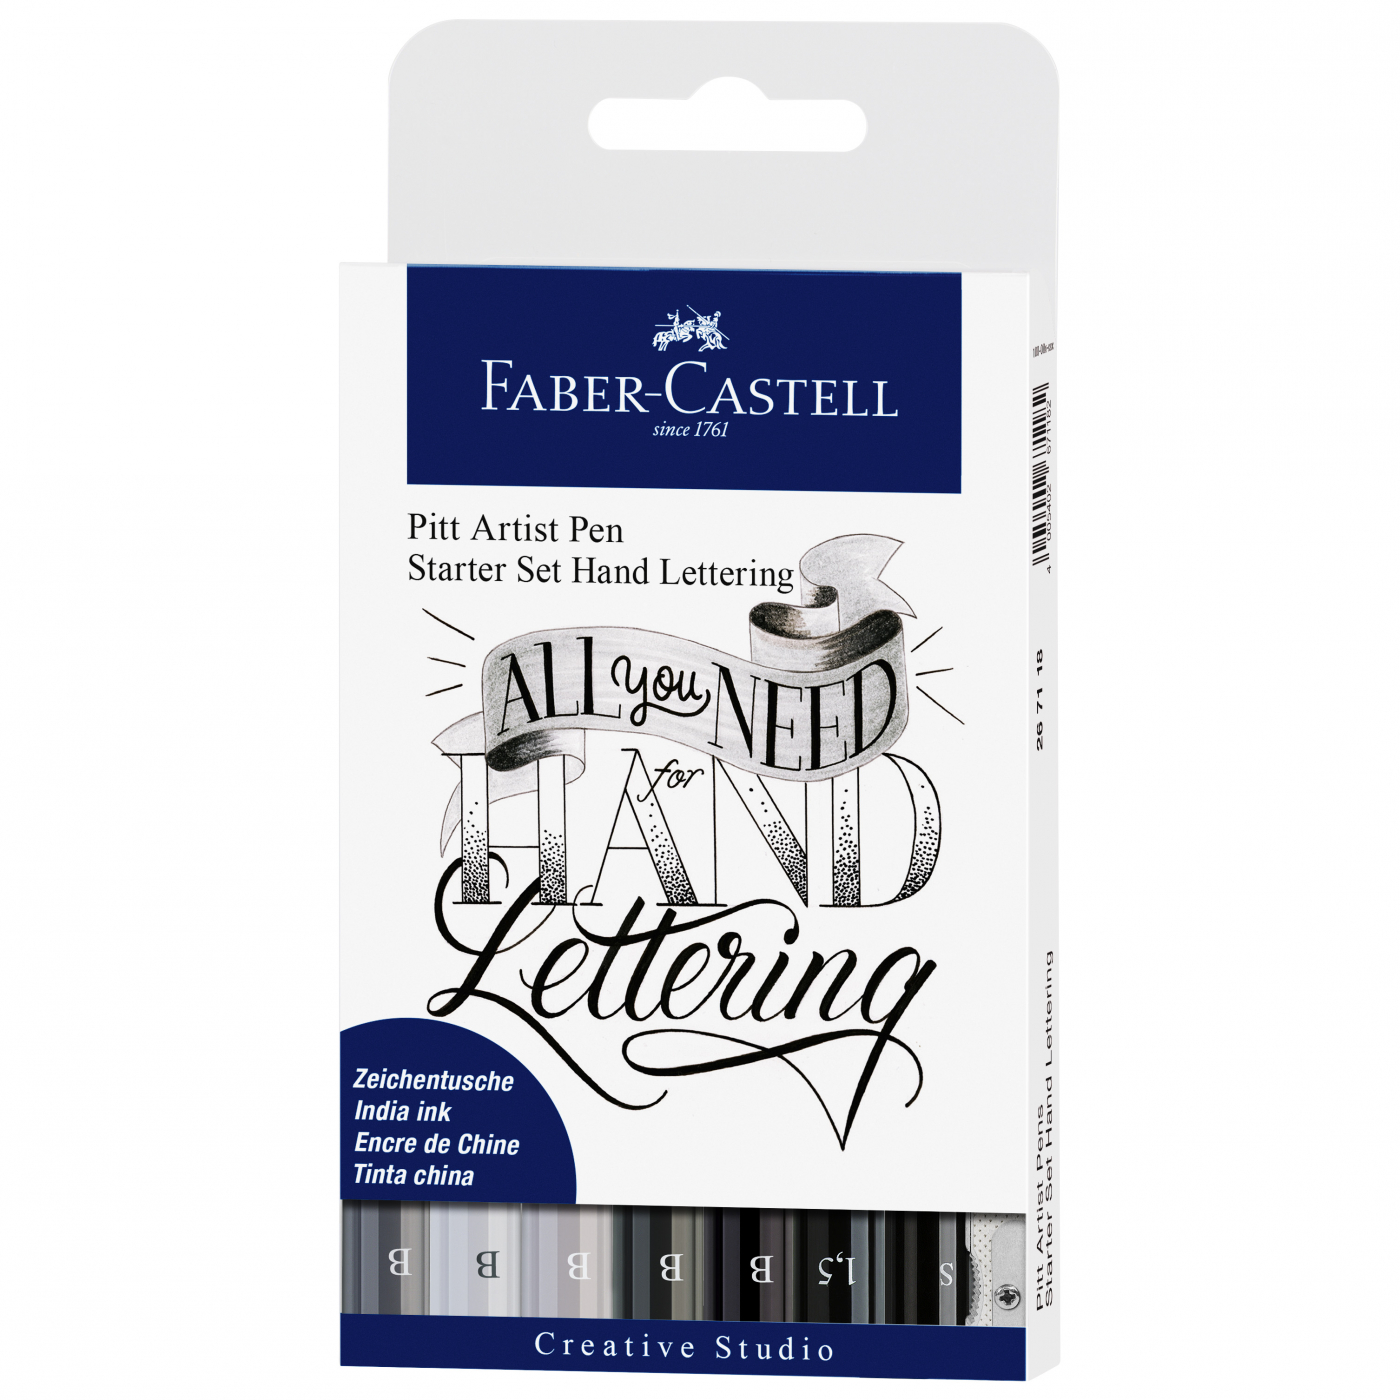 Calligraphy and Hand Lettering Pen Set